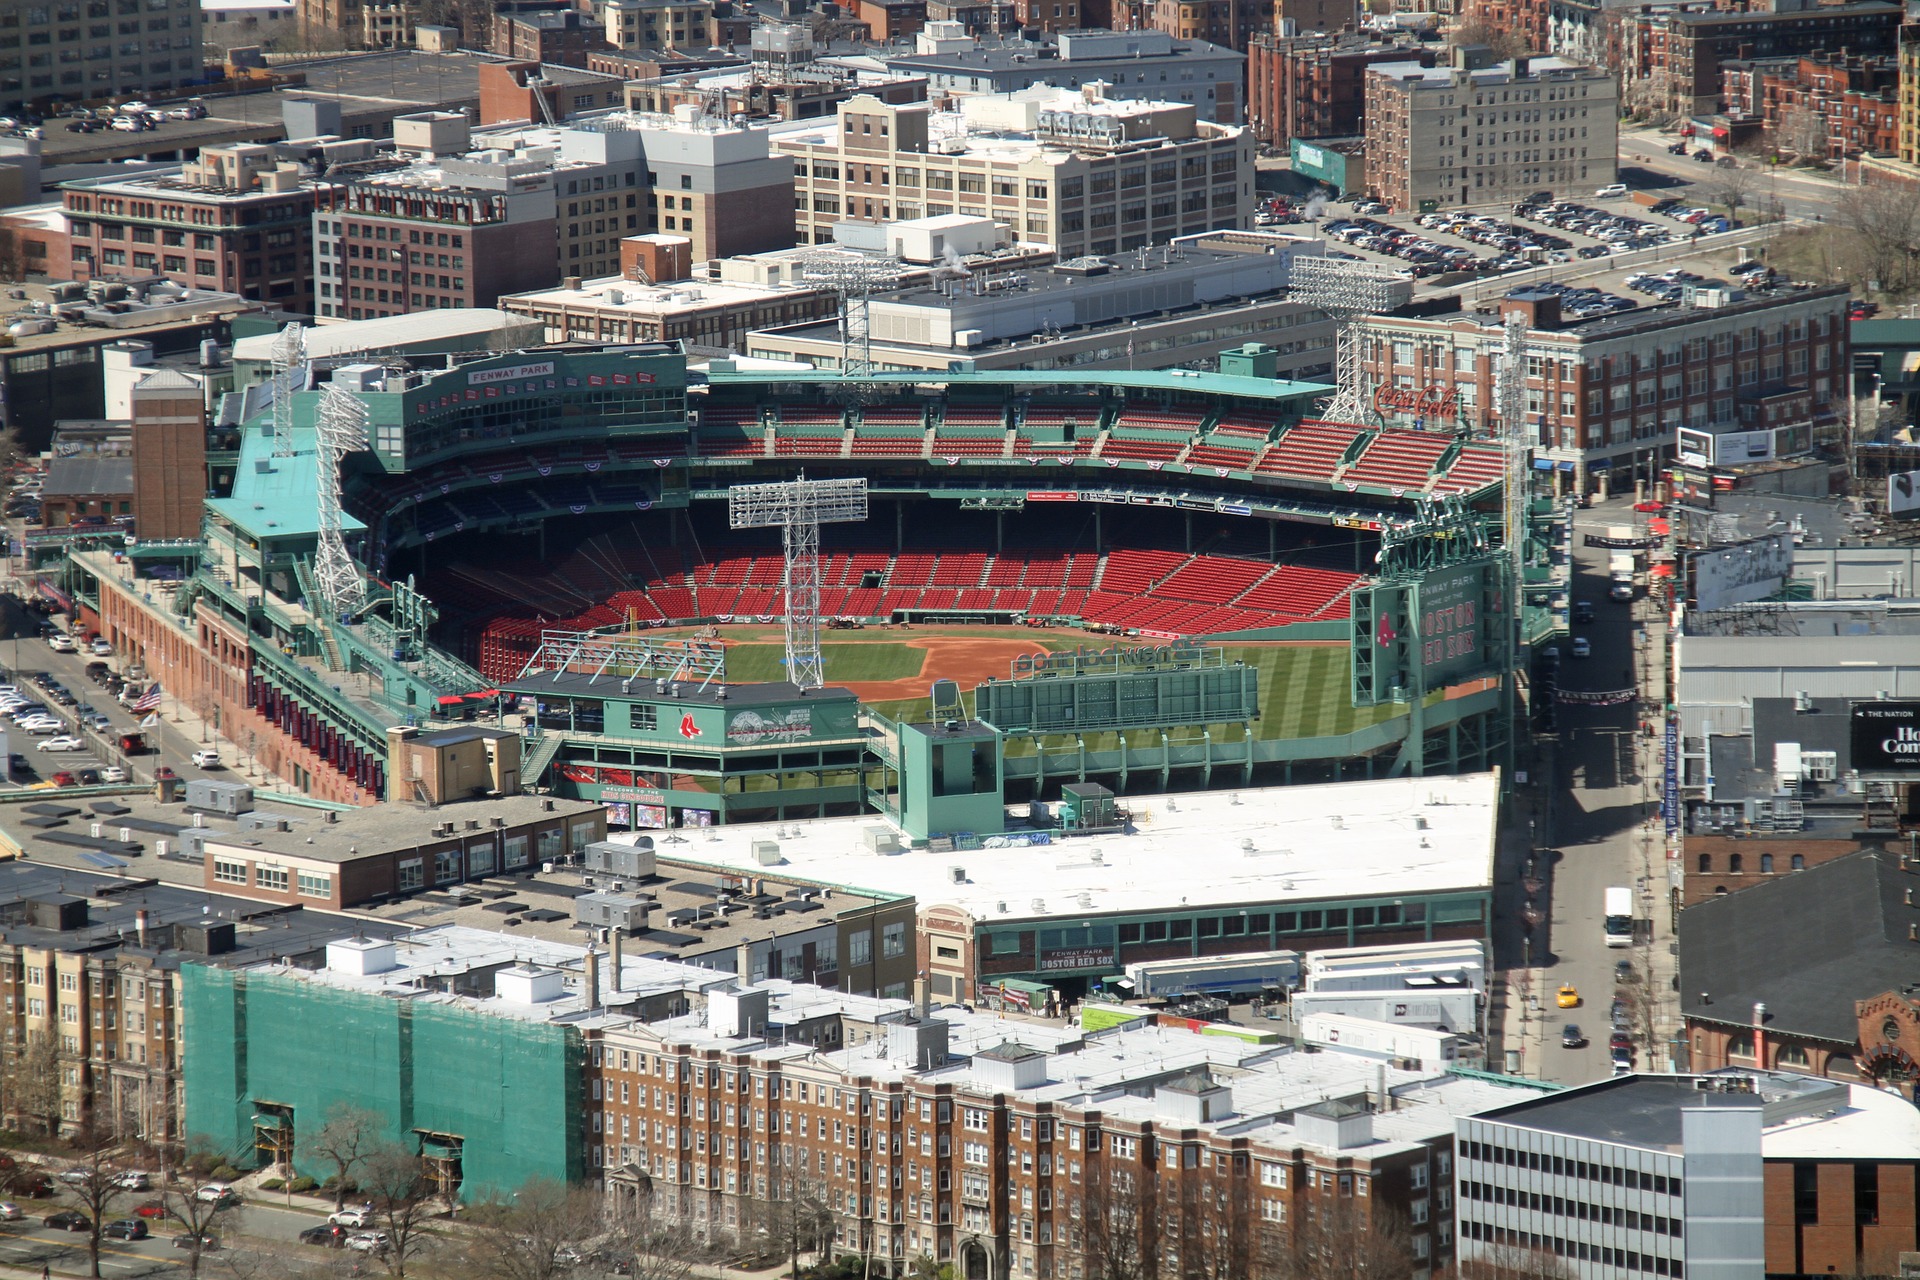 Enter To Win Four Baseball Game Tickets to See Boston Host New York on July 26